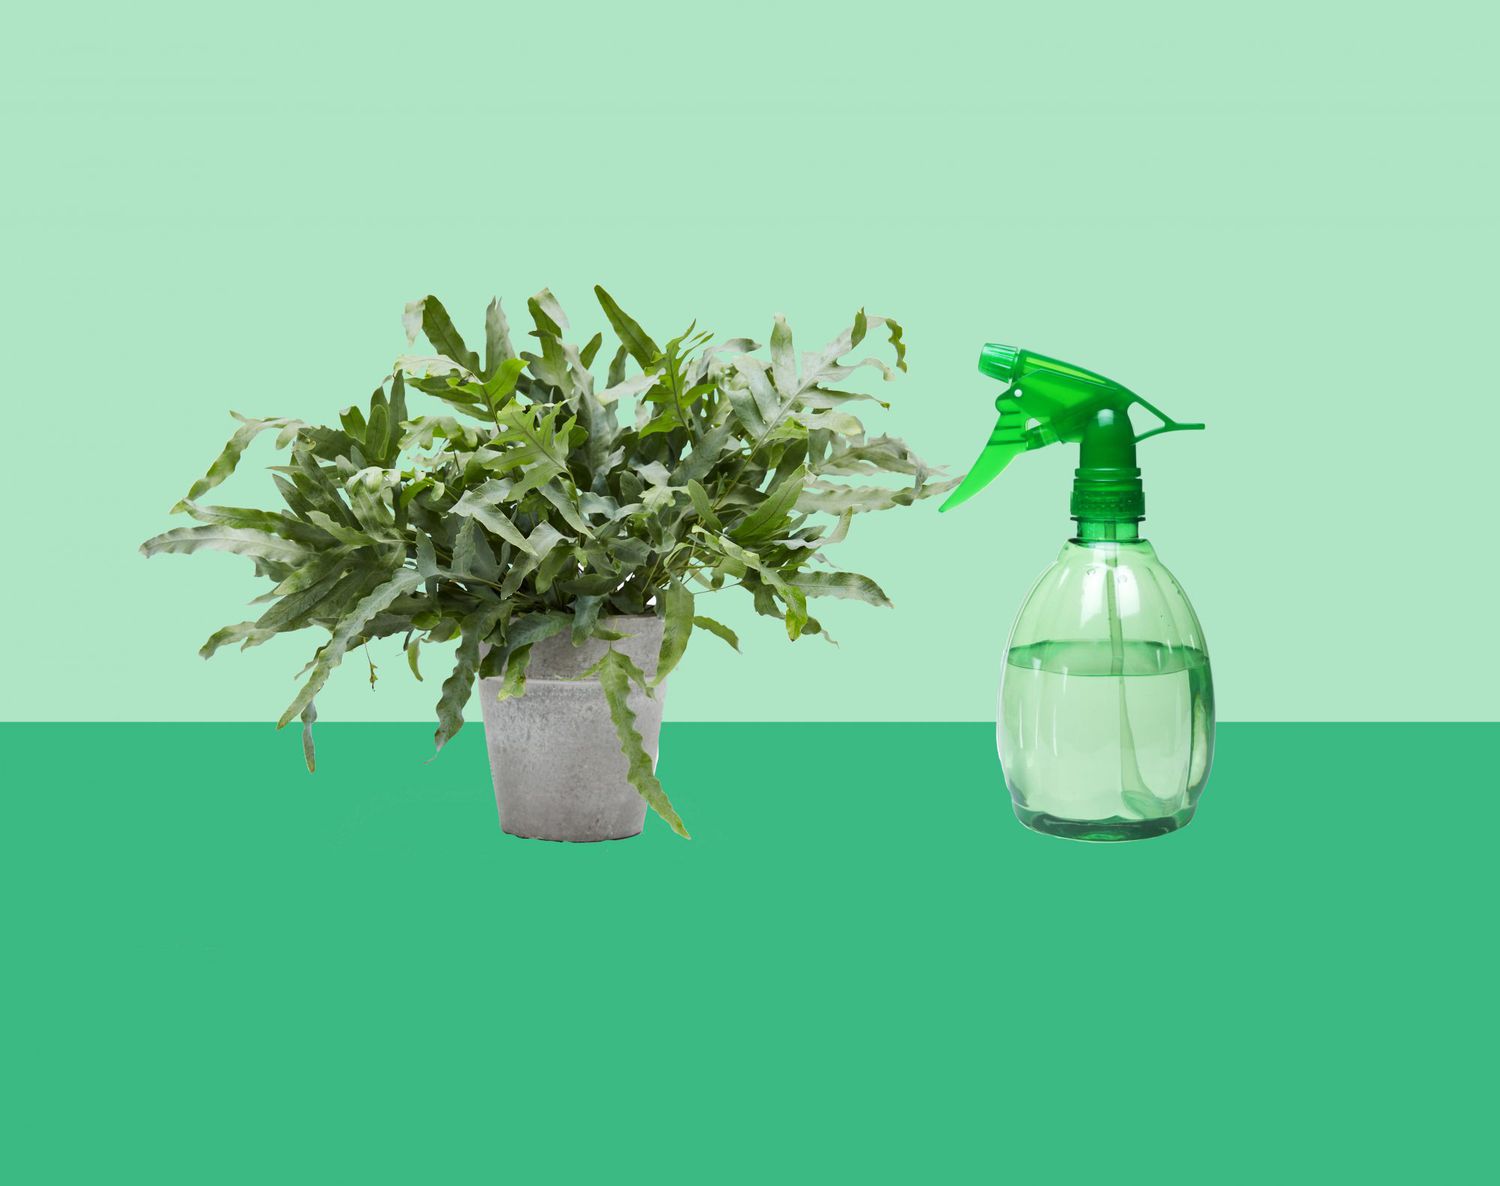 Things You Should Do For Your House Plants (Besides Just Watering Them)